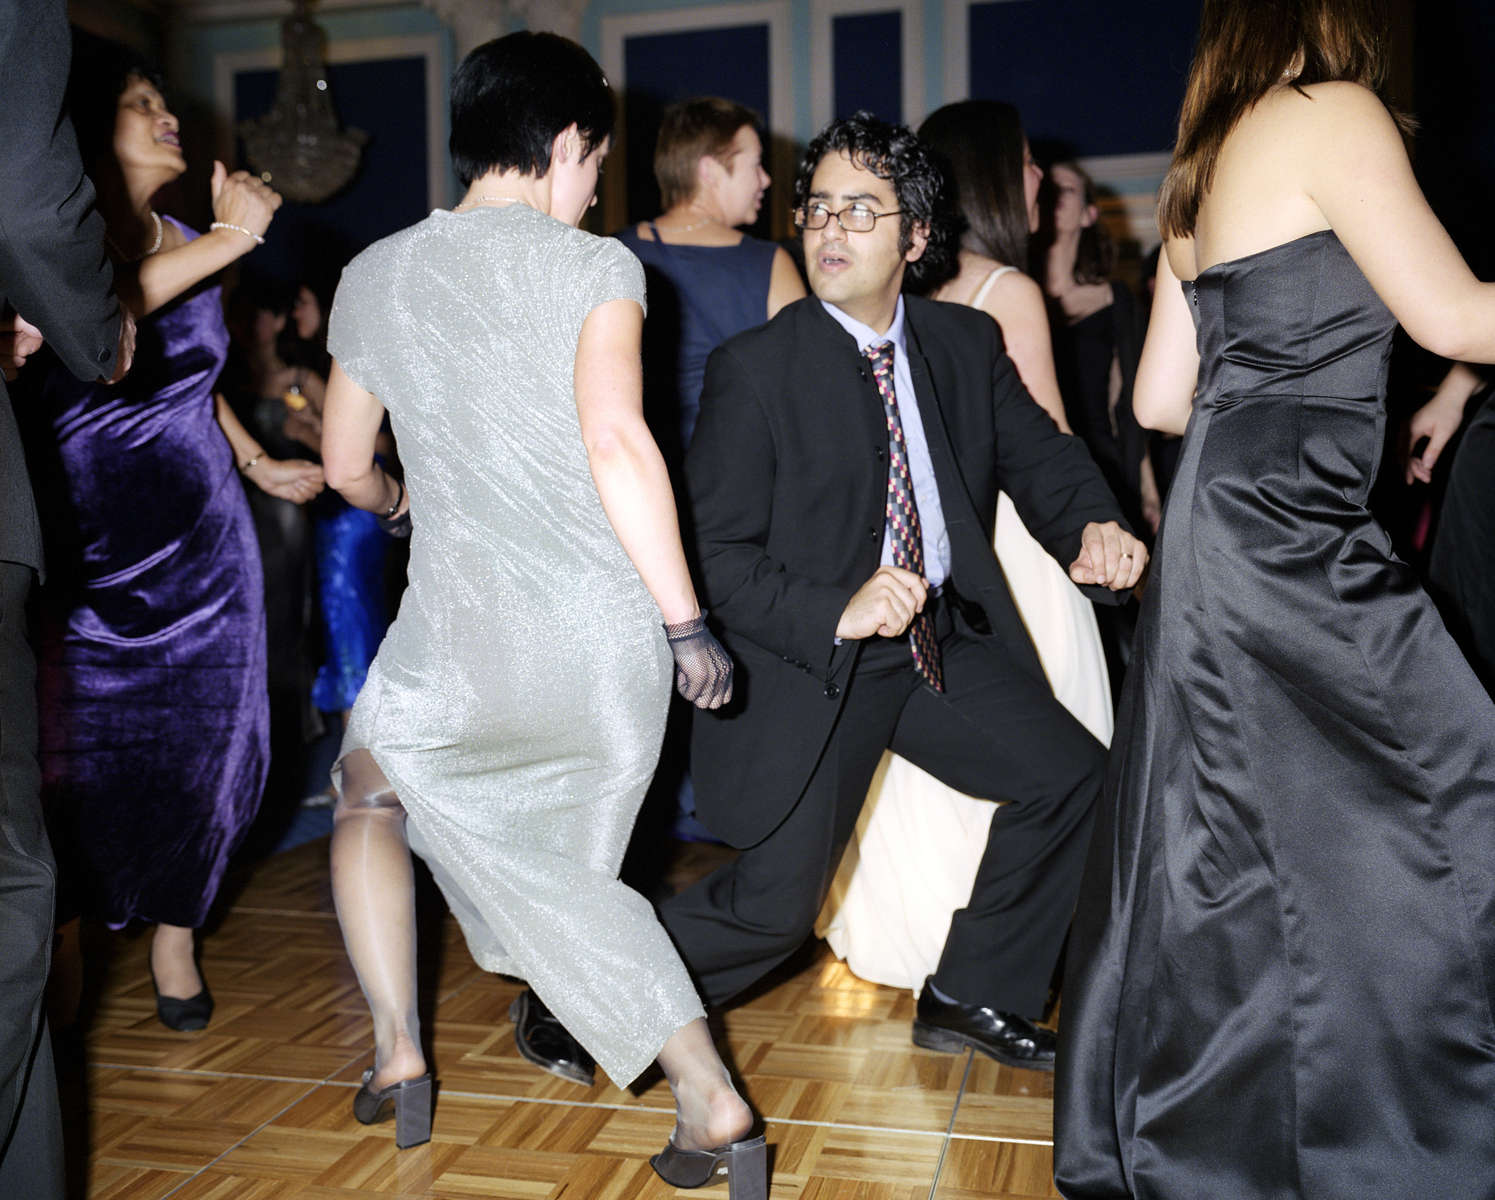 Mansfield Law Society employees dance at a Christmas party at the New Connaught Rooms, London. November 2002